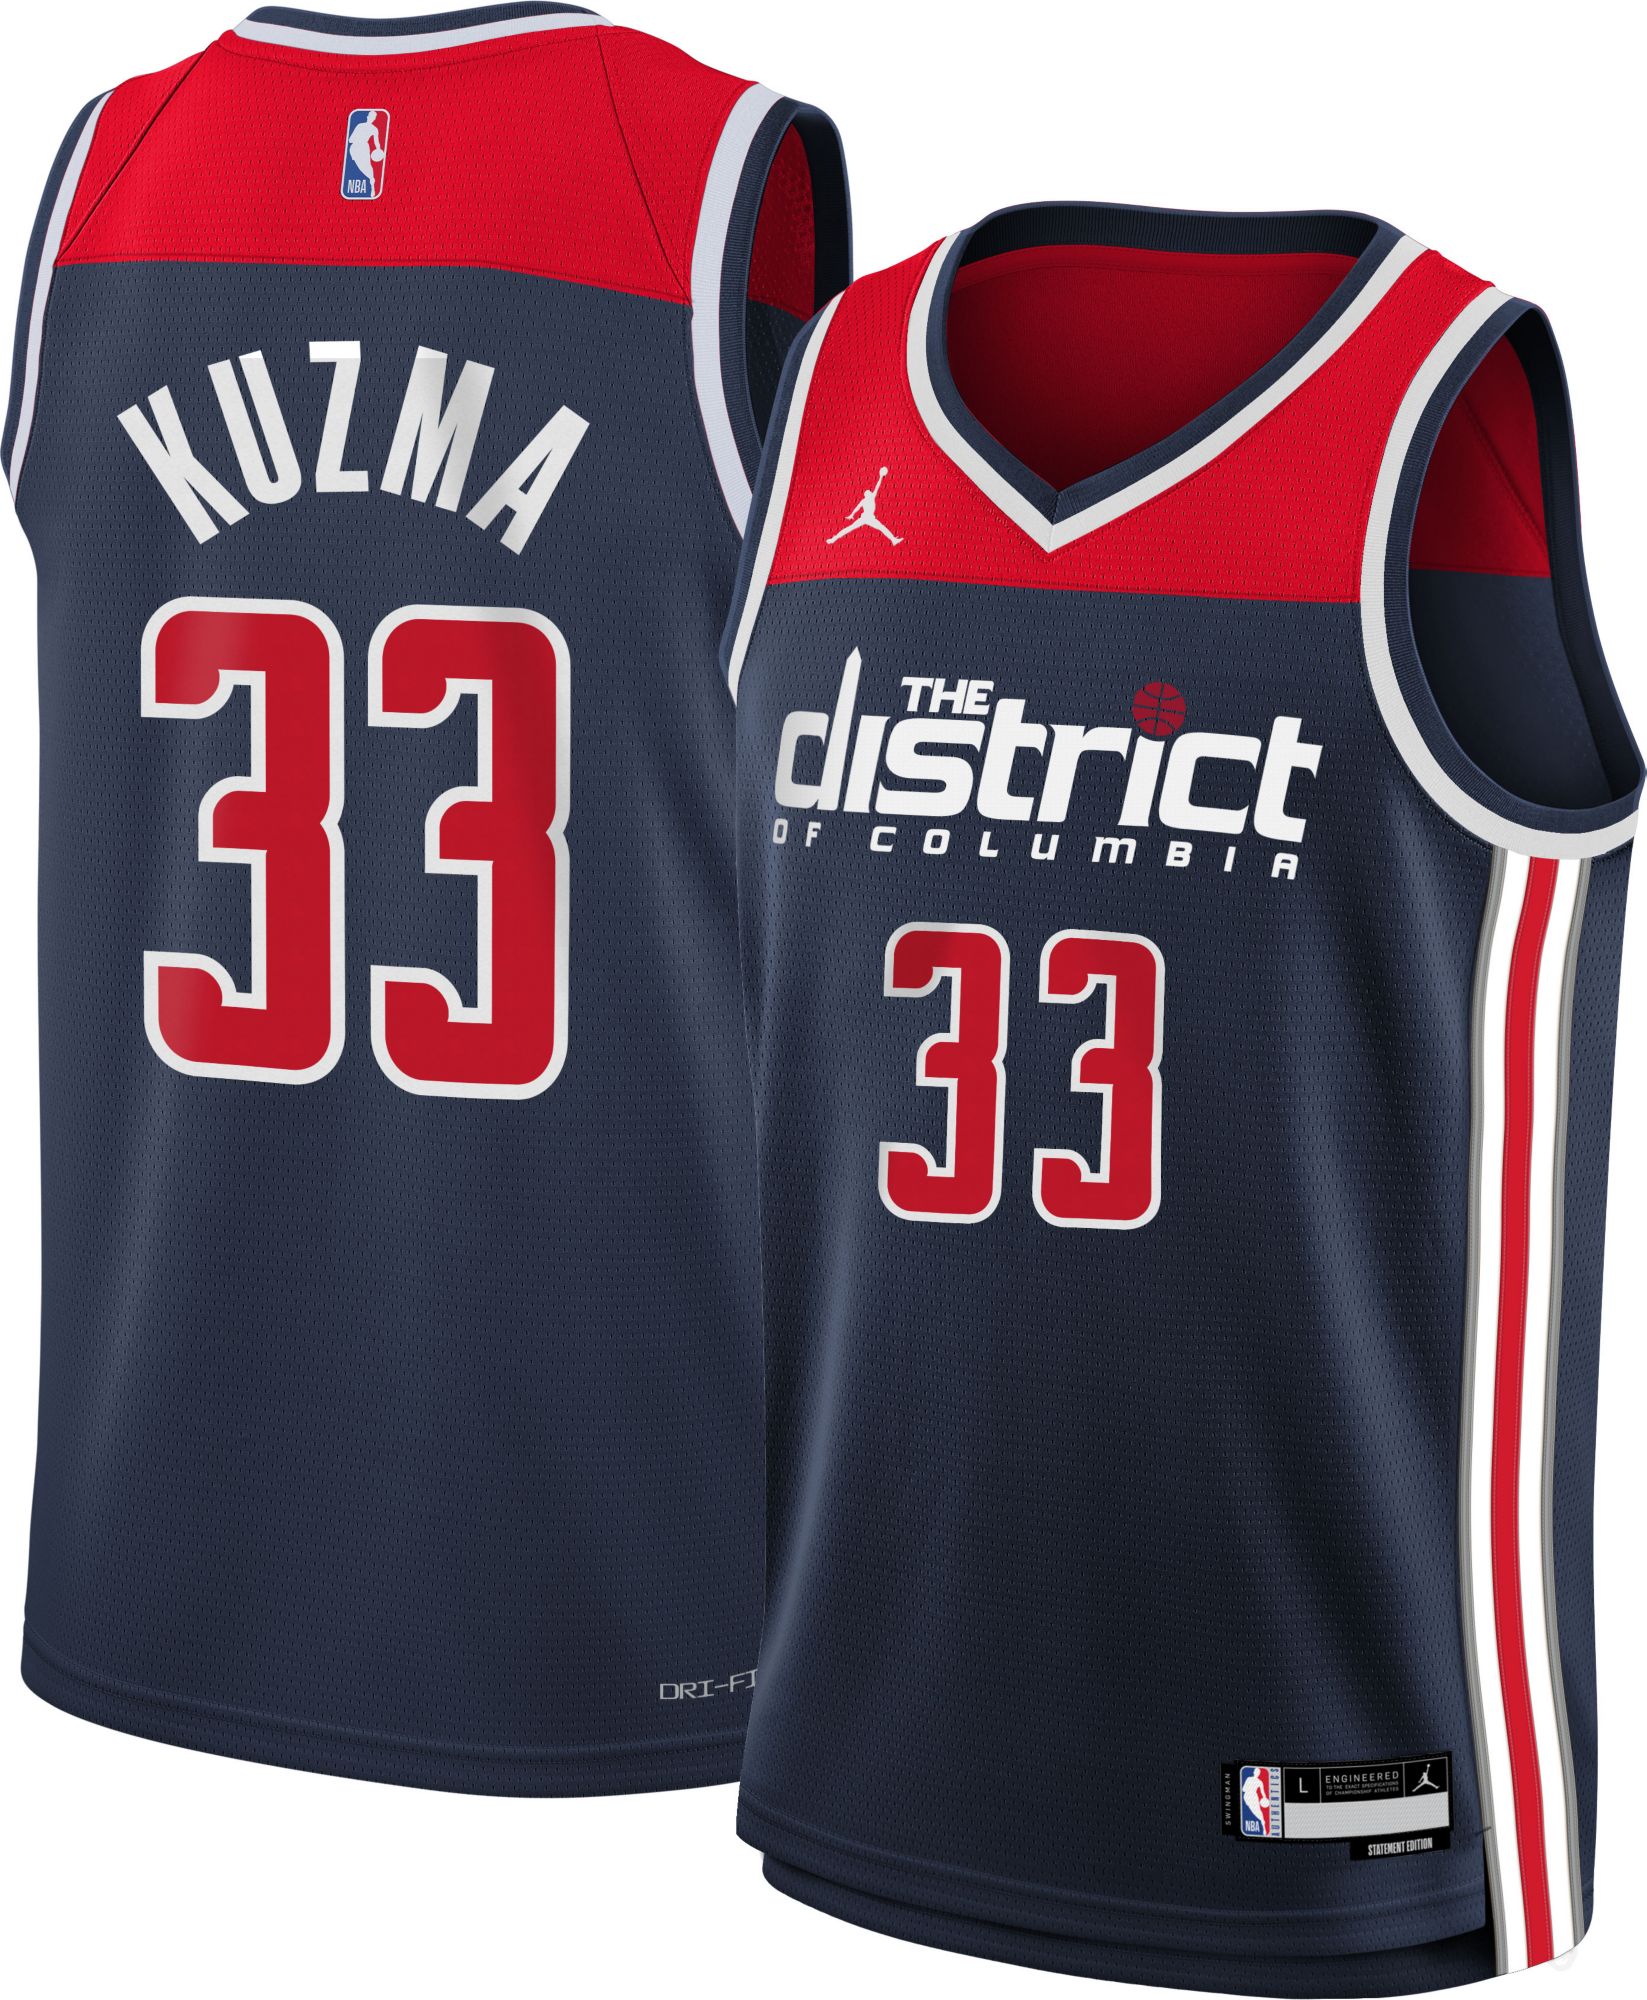 Allen Kyle youth jersey